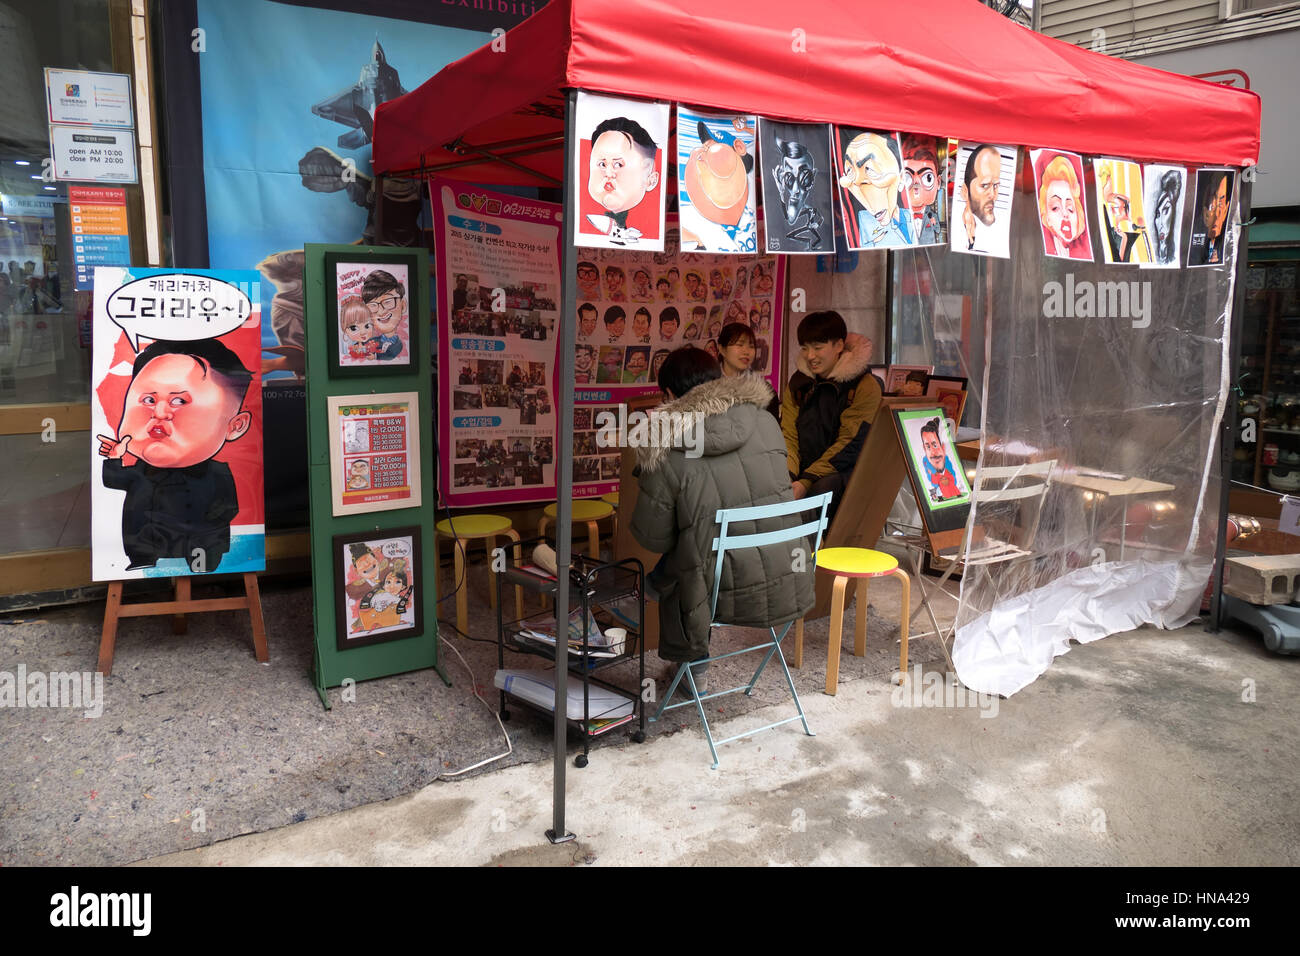 Man painting caricatures. Stall selling paintings of celebrities. Seoul, South Korea, Asia Stock Photo